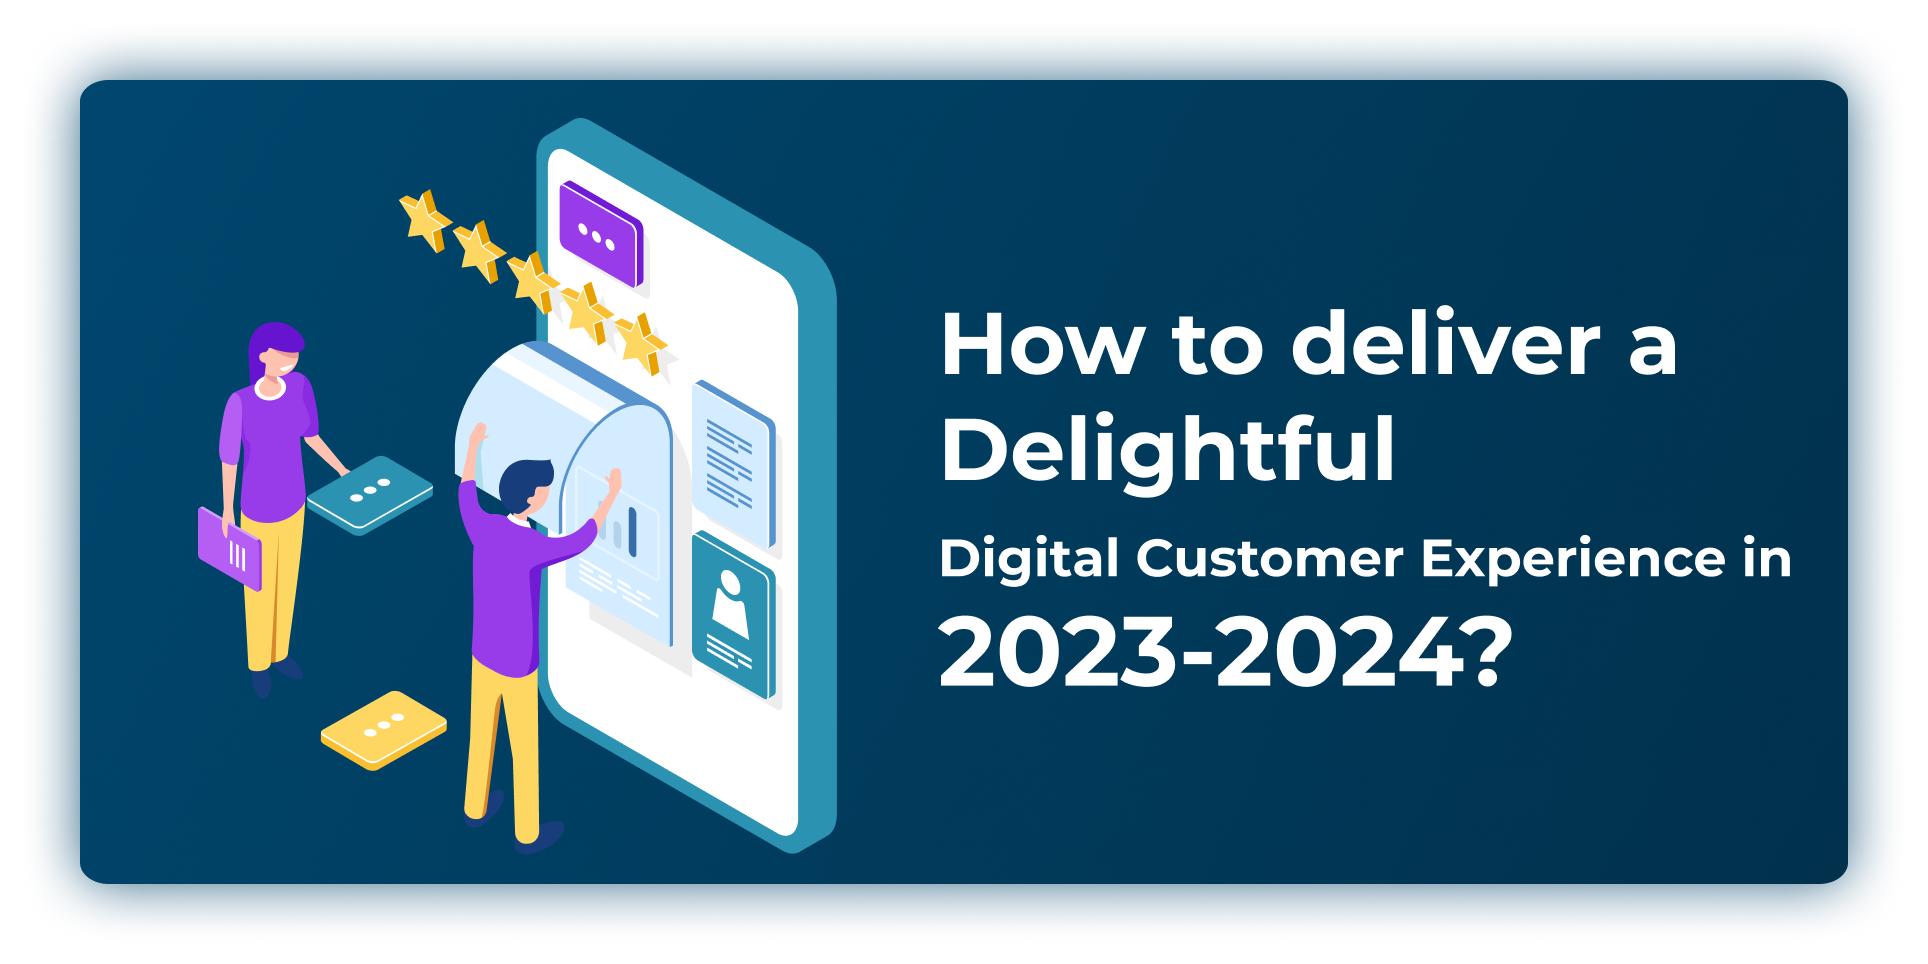 How to deliver a Delightful Digital Customer Experience in 2023-2024